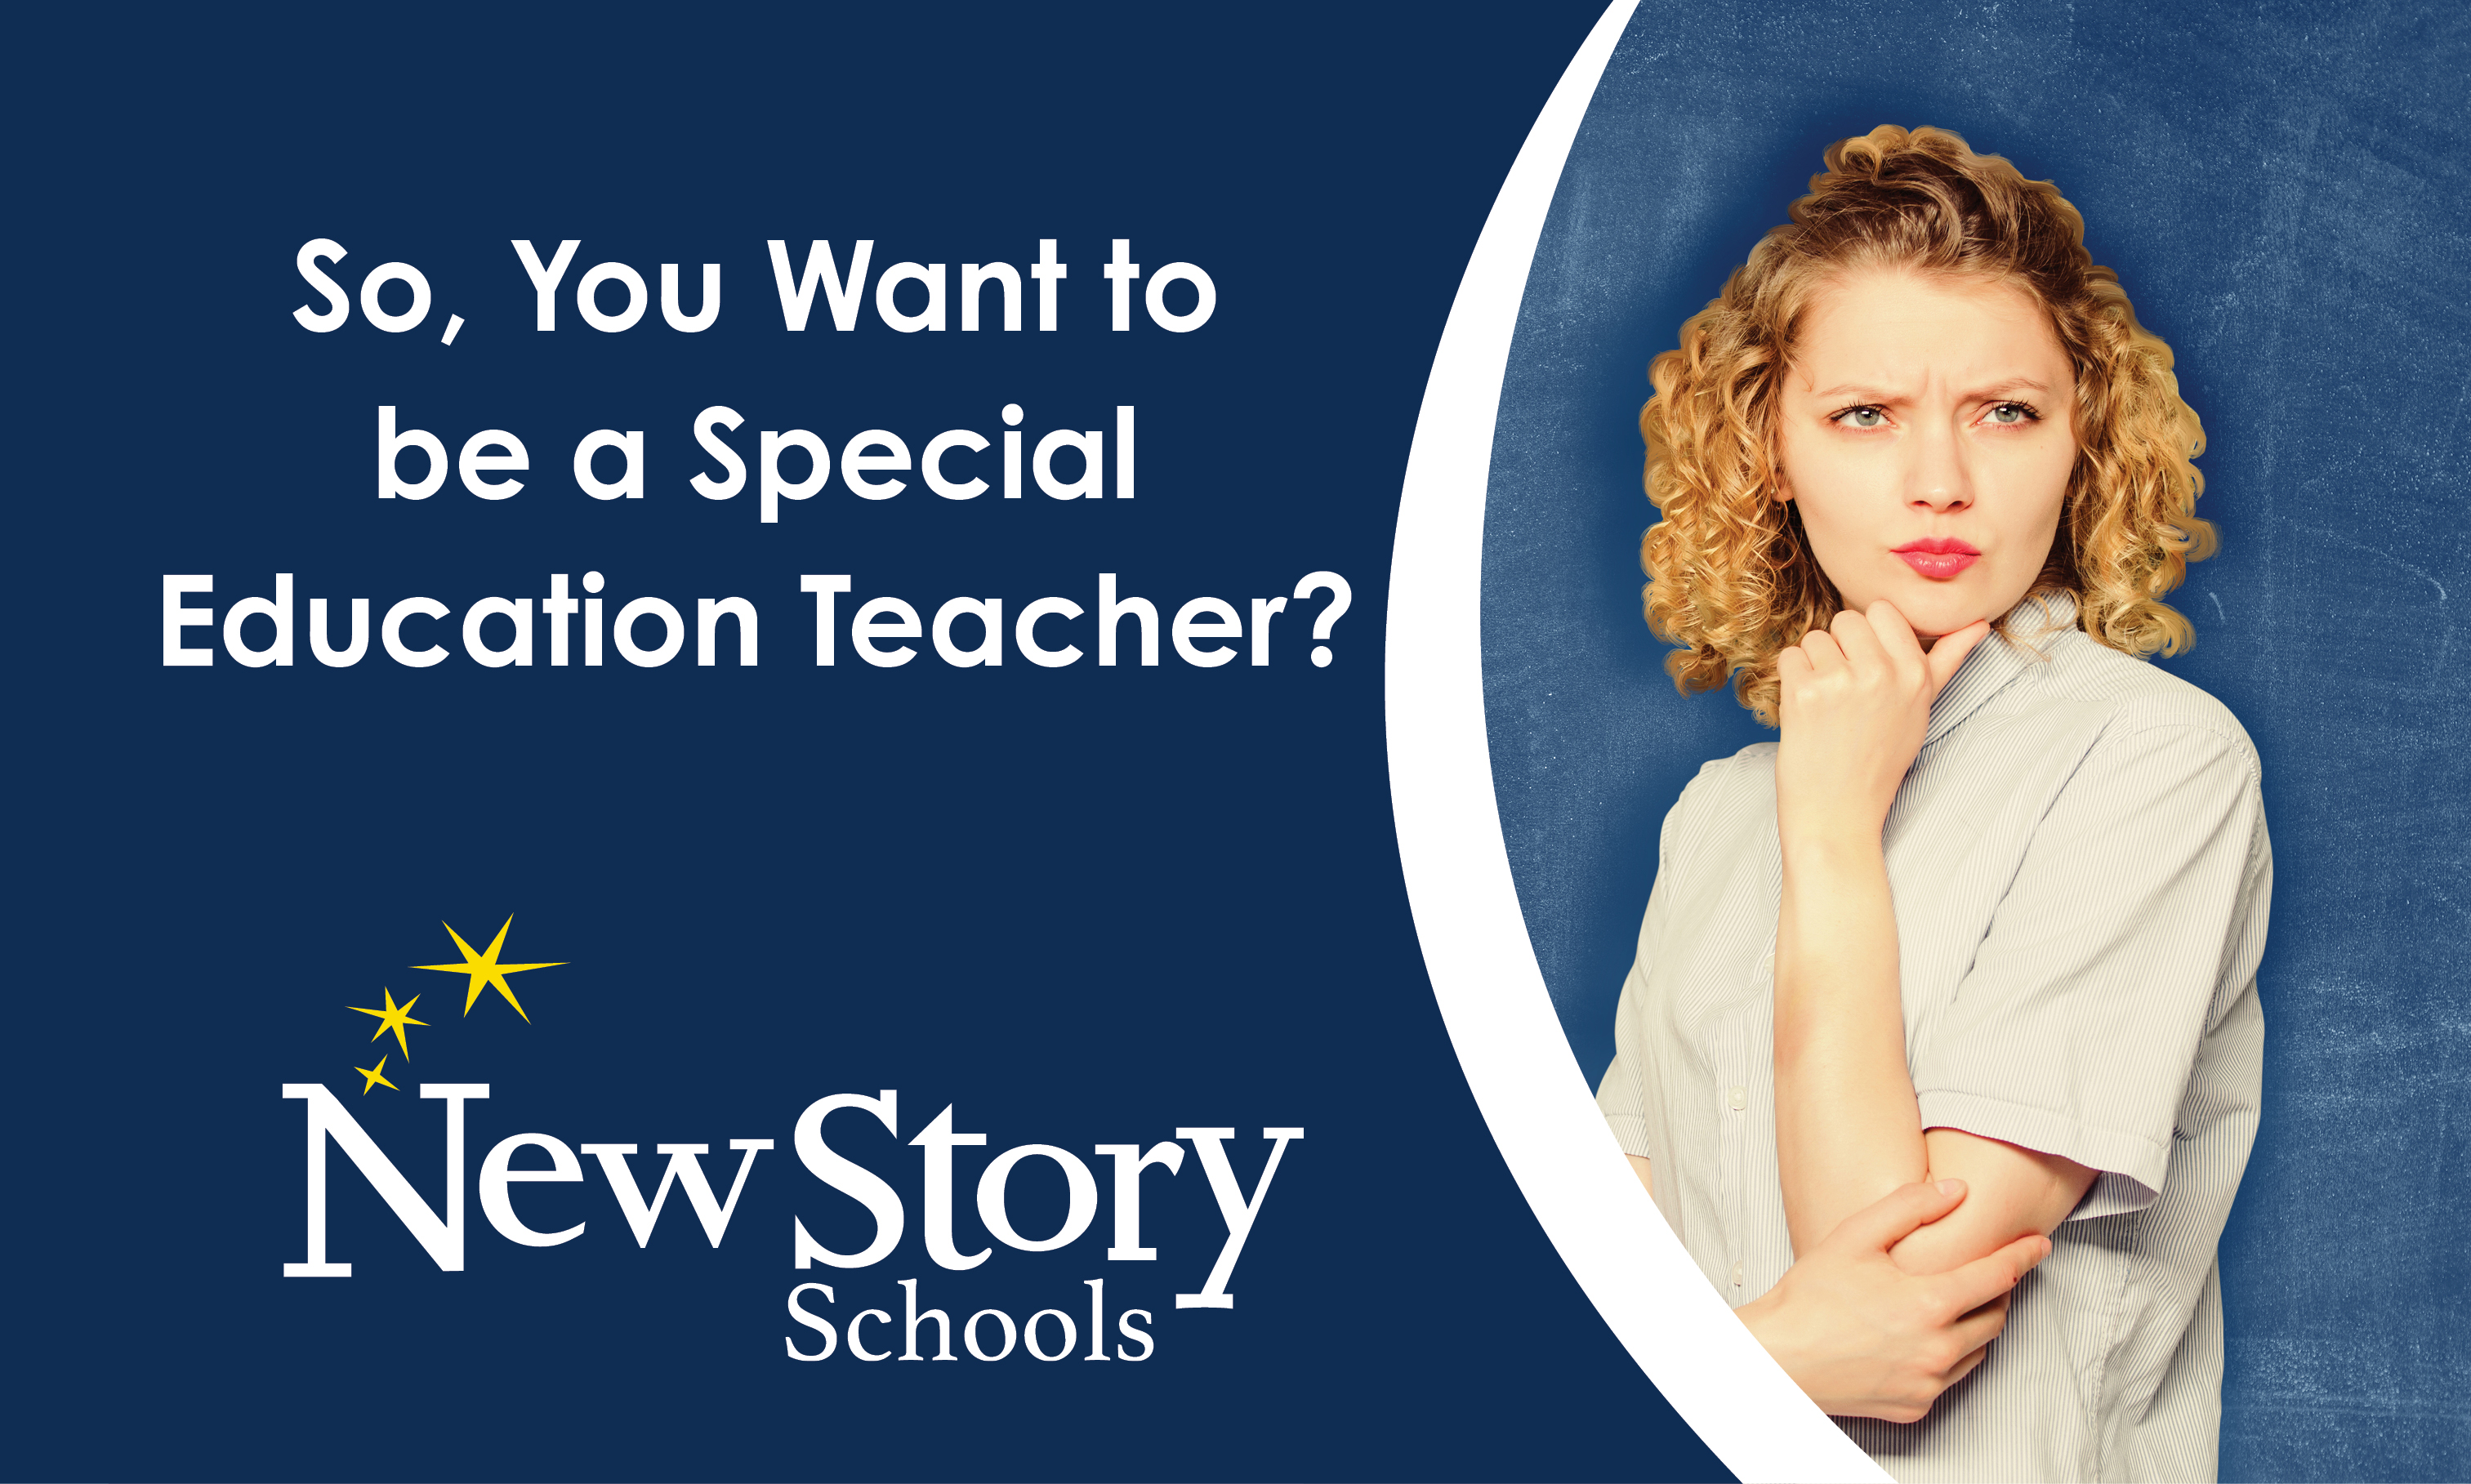 So, You Want to be a Special Education Teacher?